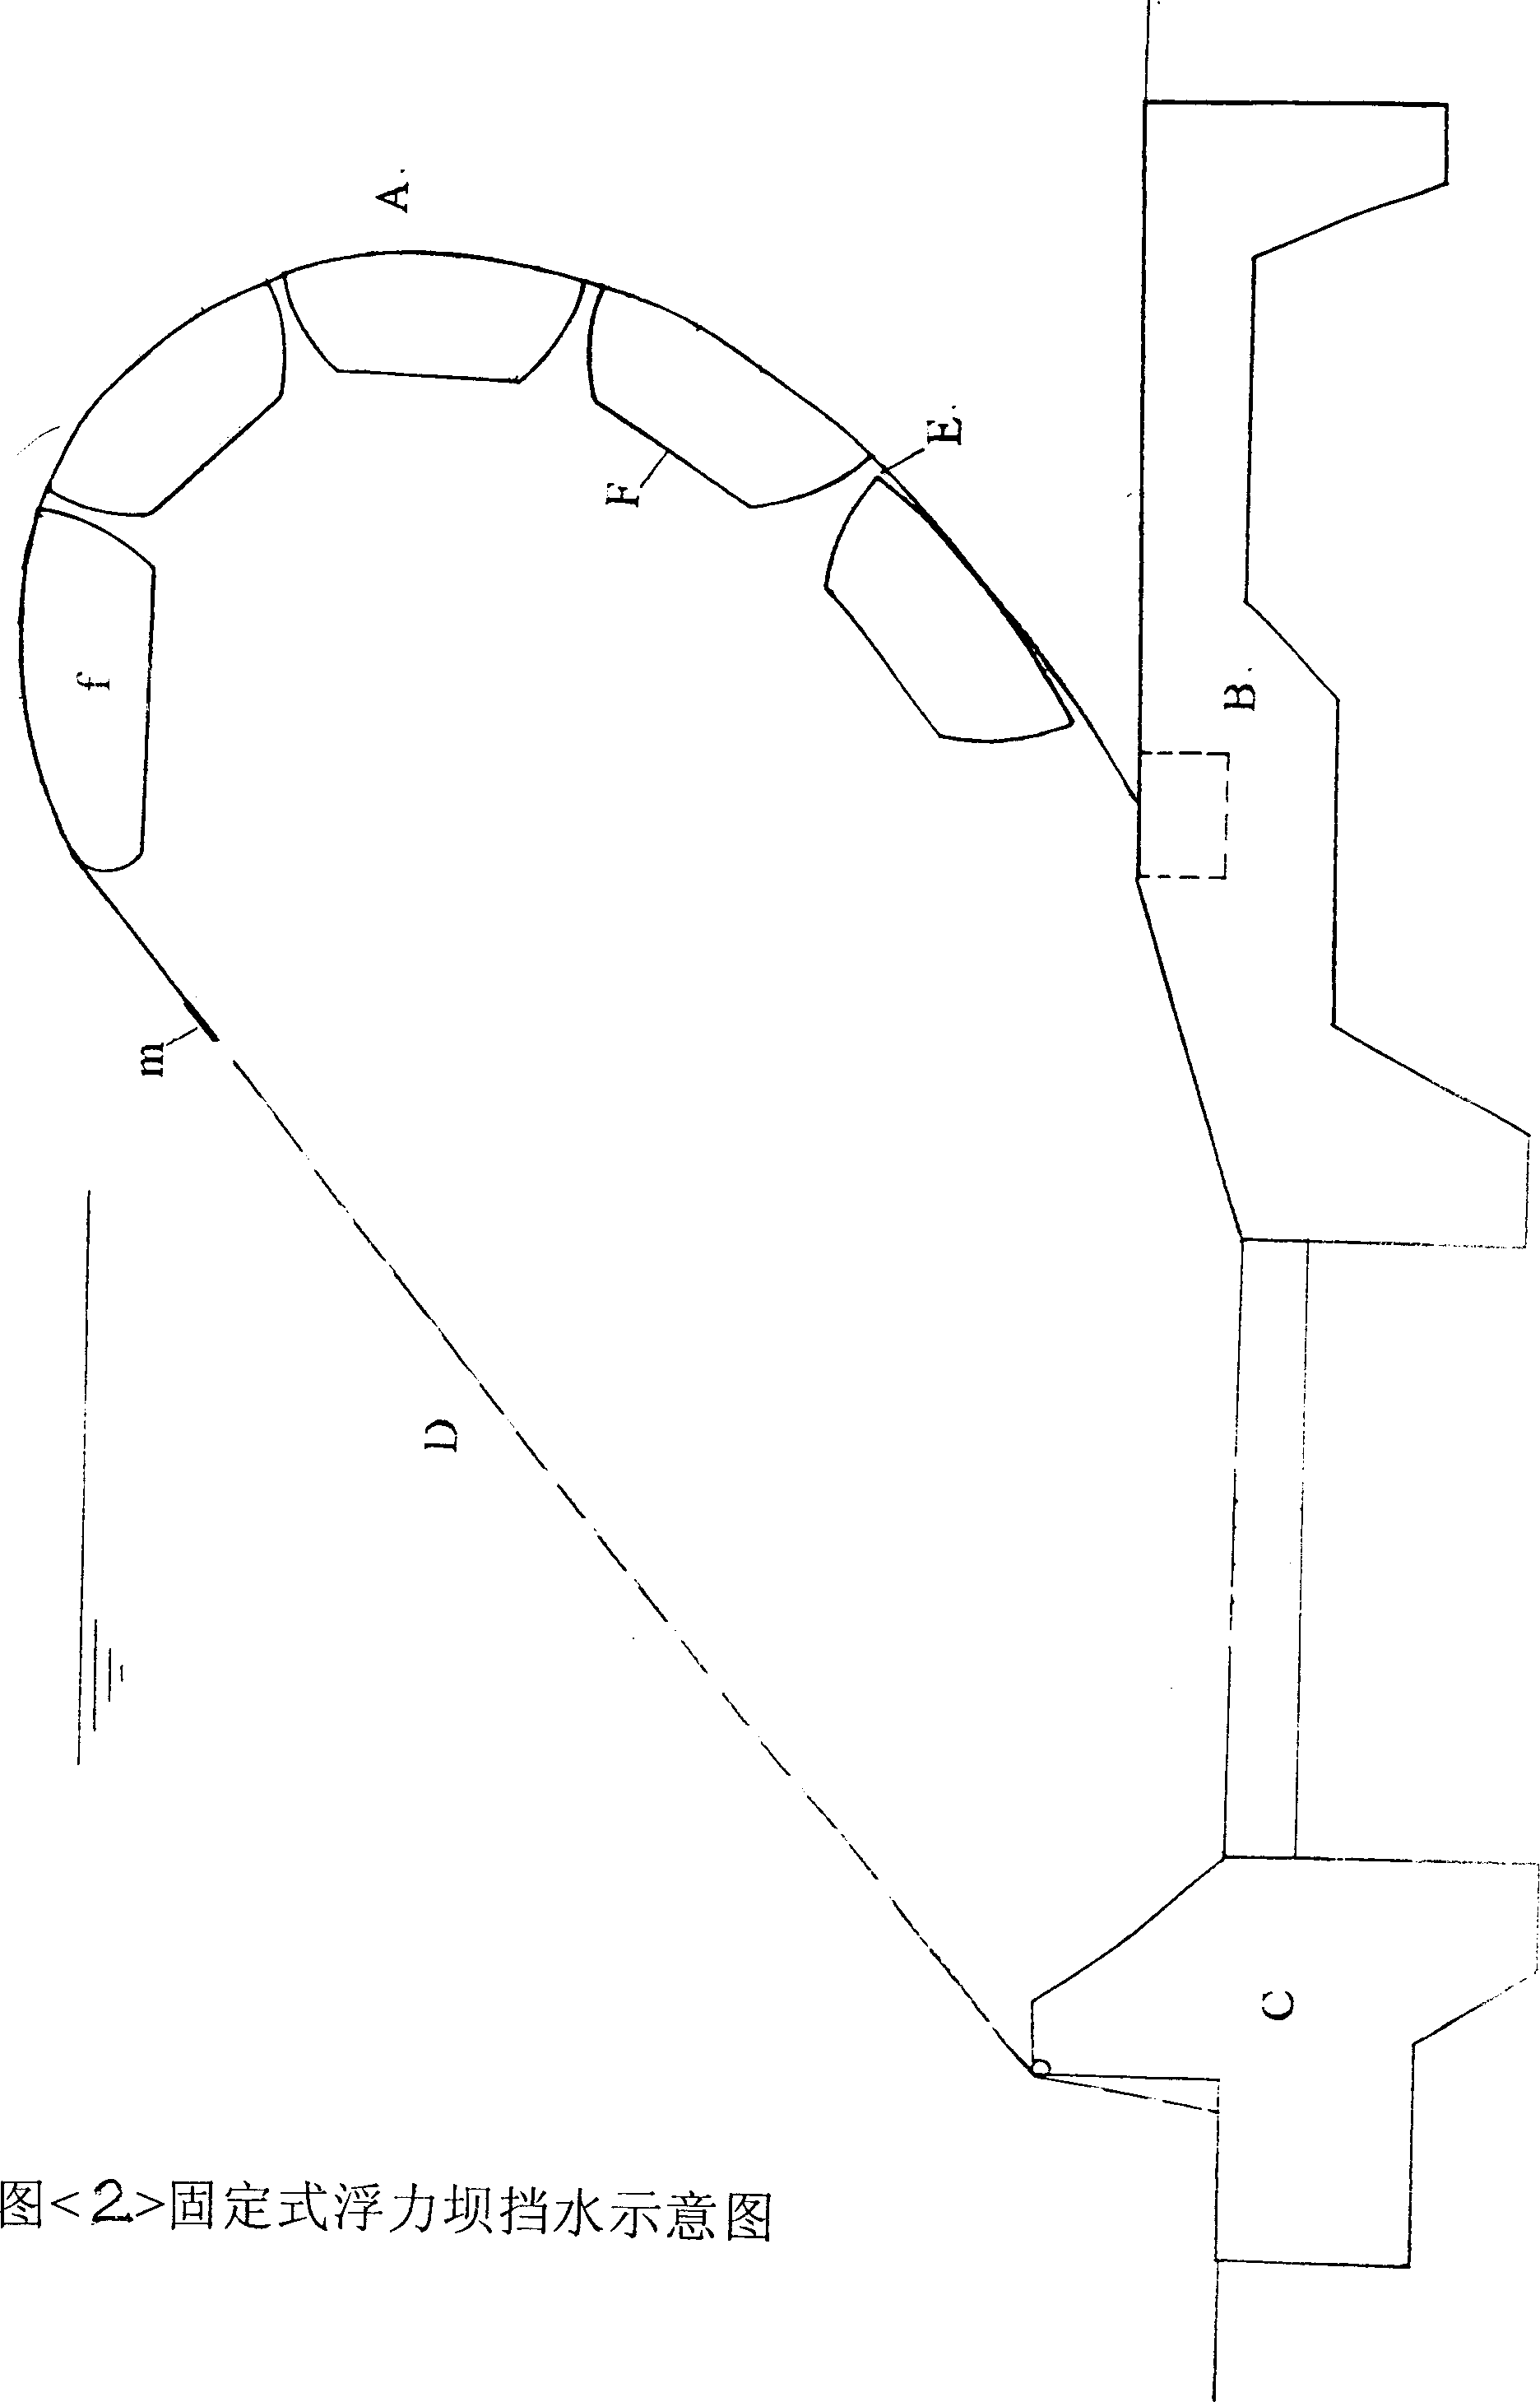 Flexible dam with aid of buoyancy and its construction method